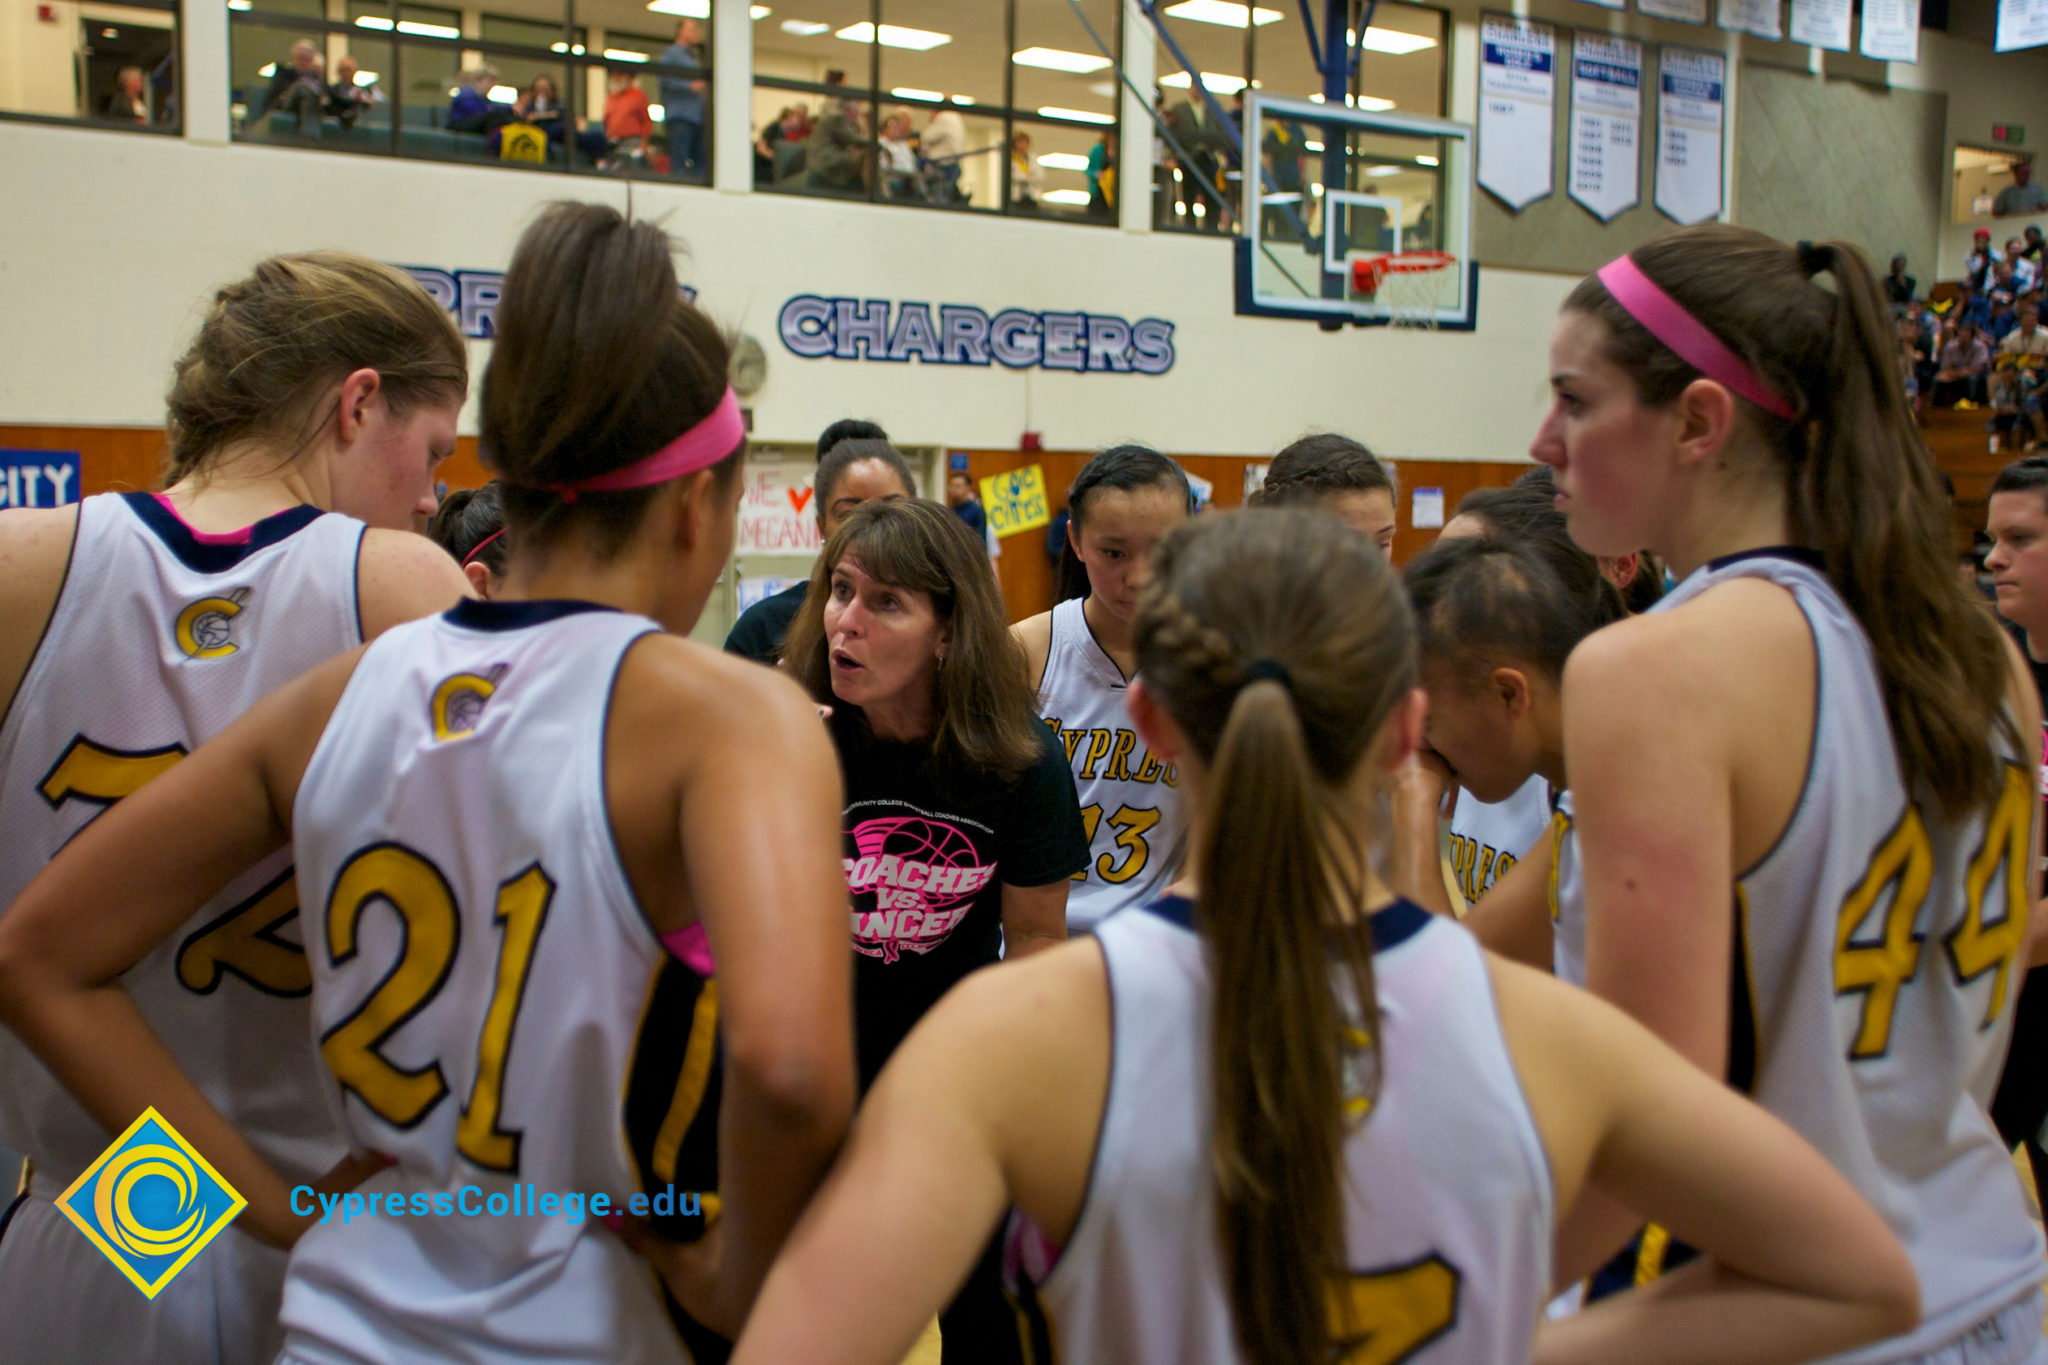 Women's basketball team huddled while their coach gives direction.